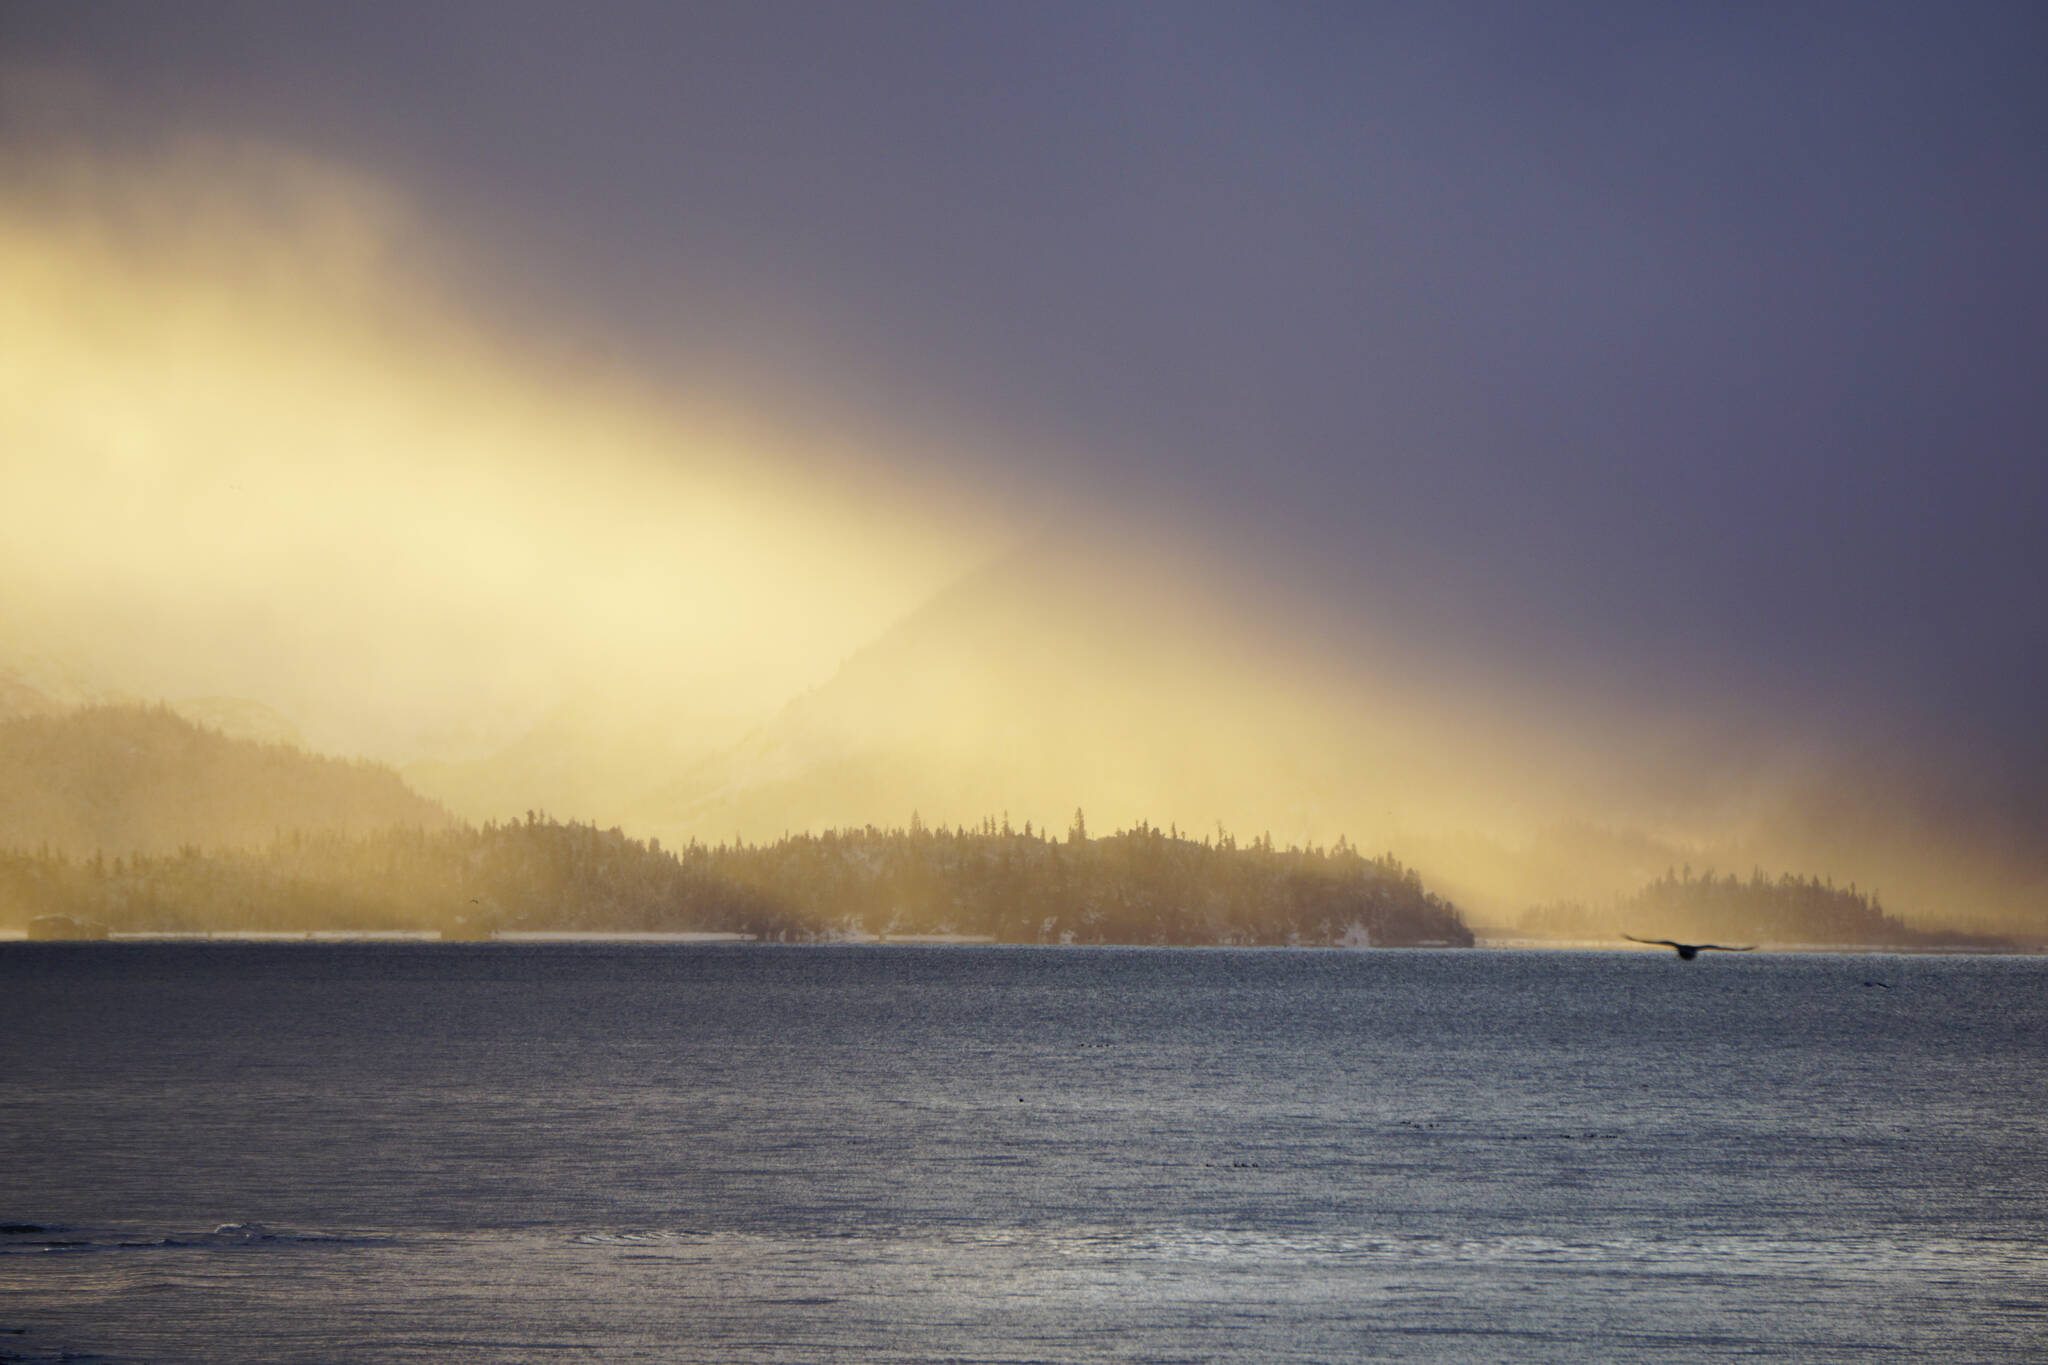 The sun shines on Yukon Island on Thurday, Oct. 28, 2021, as seen from Bishop's Beach in Homer, Alaska. (Photo by Michael Armstrong/Homer News)